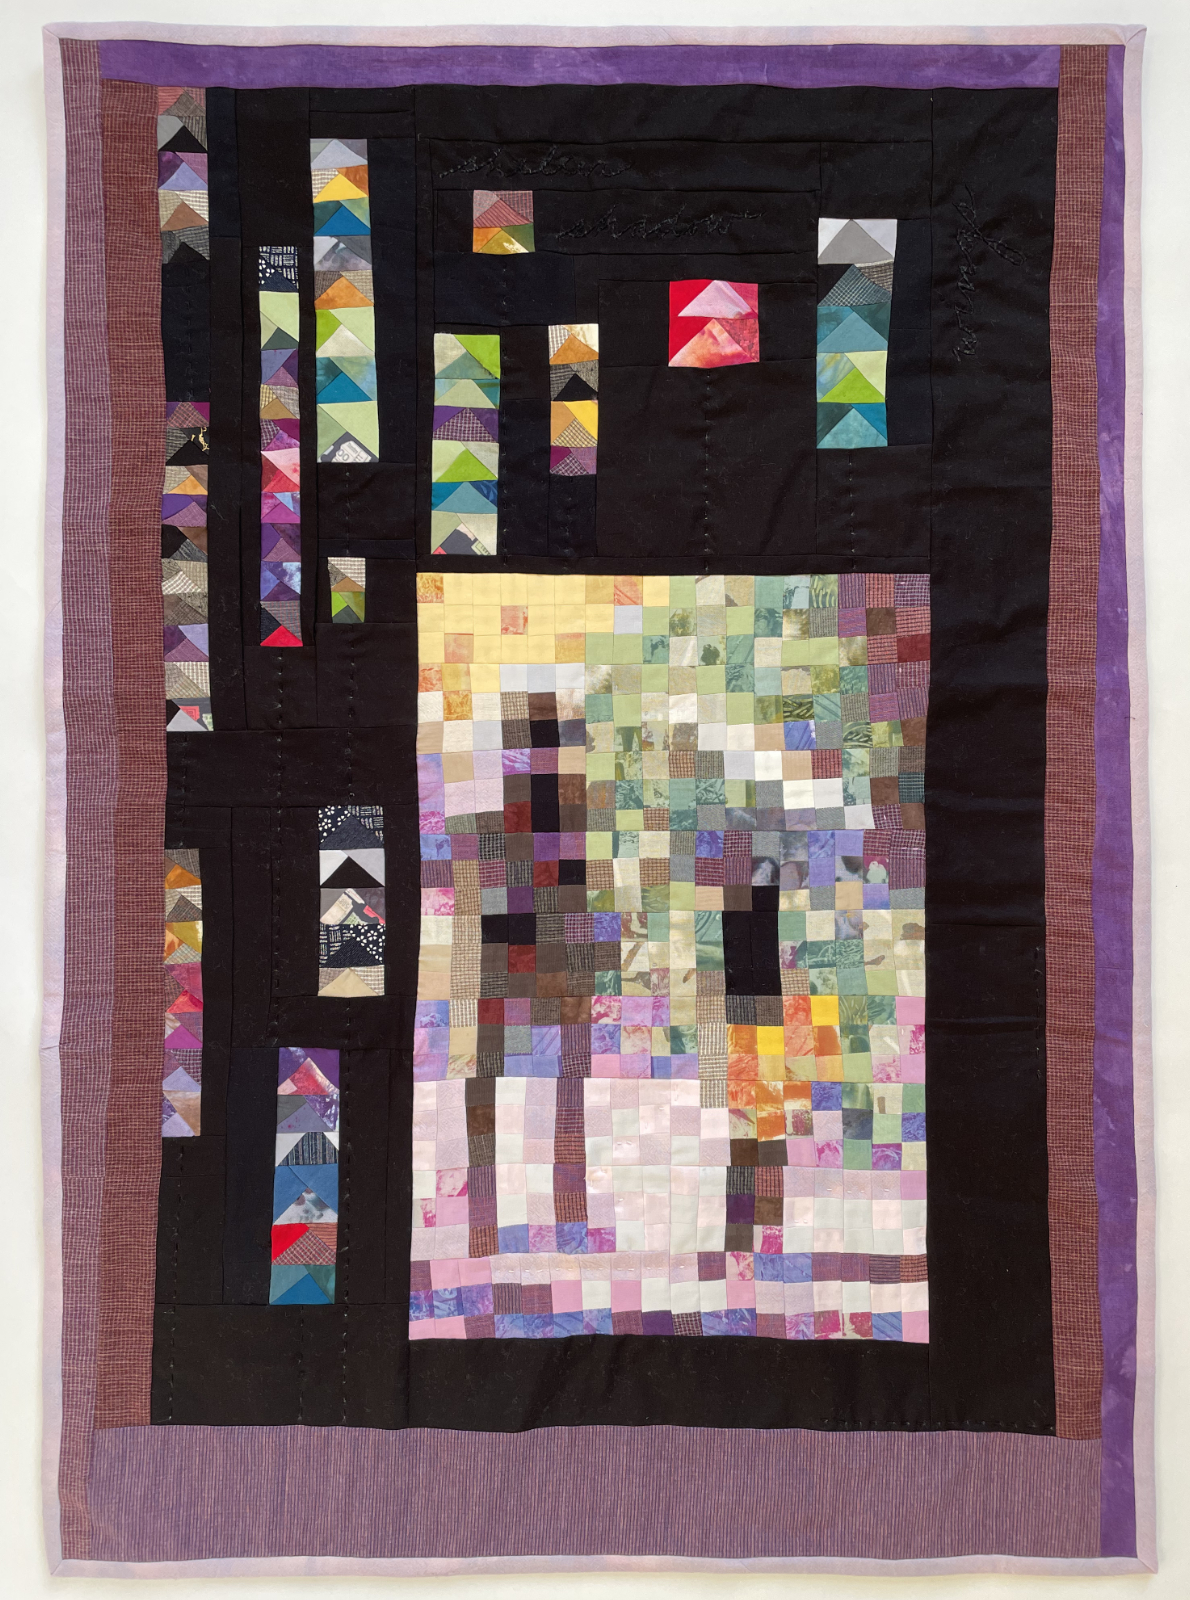 pieced quilt of image made up of squares of a woman shading her daughter with parasol as they walk